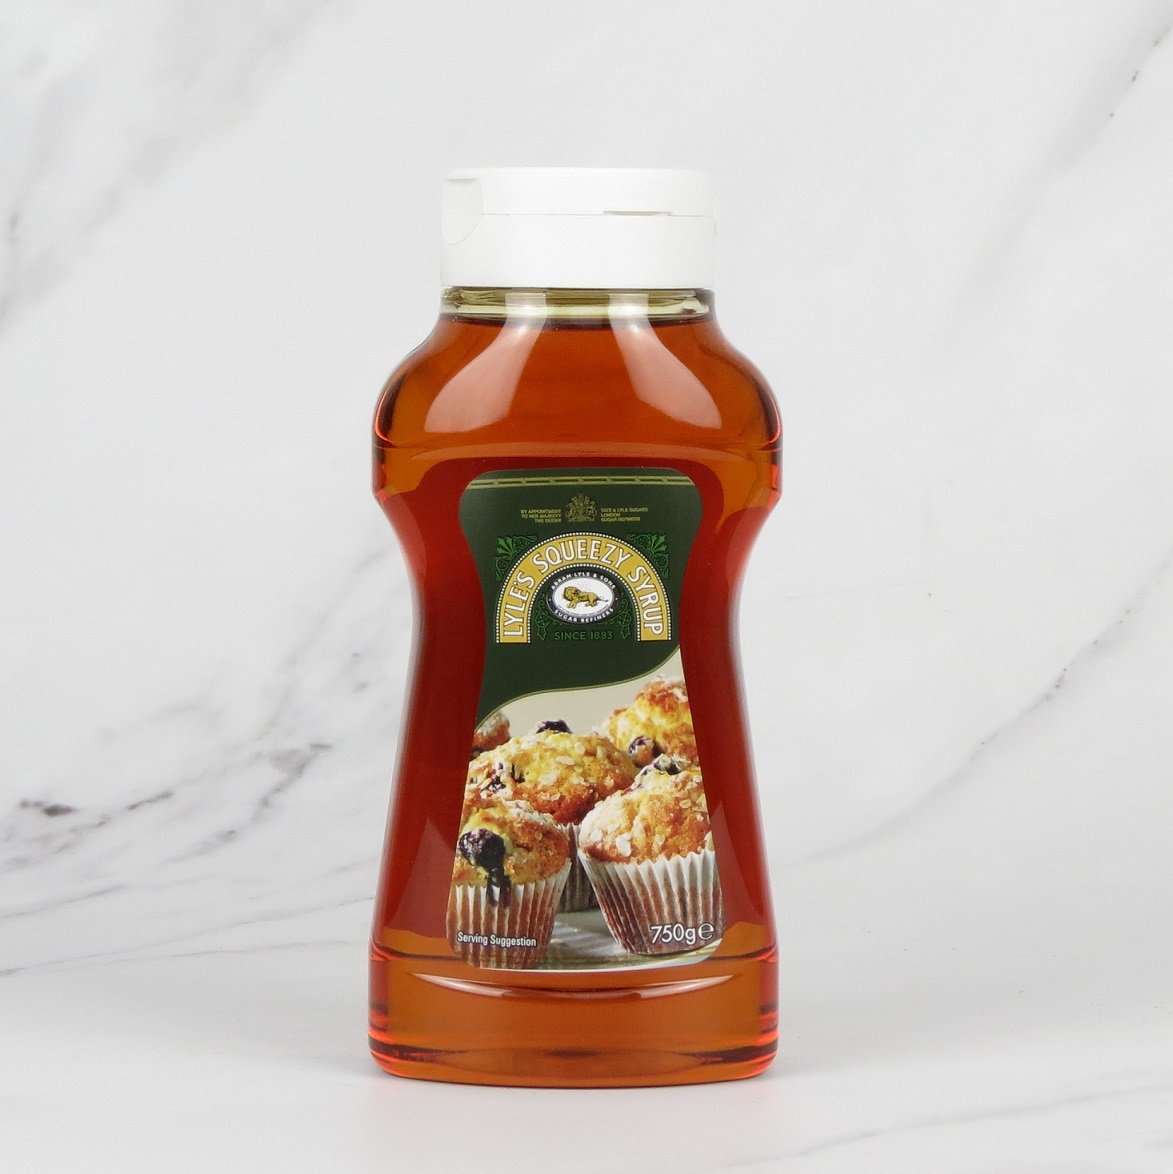 Lyle’s Golden Syrup – 750ml